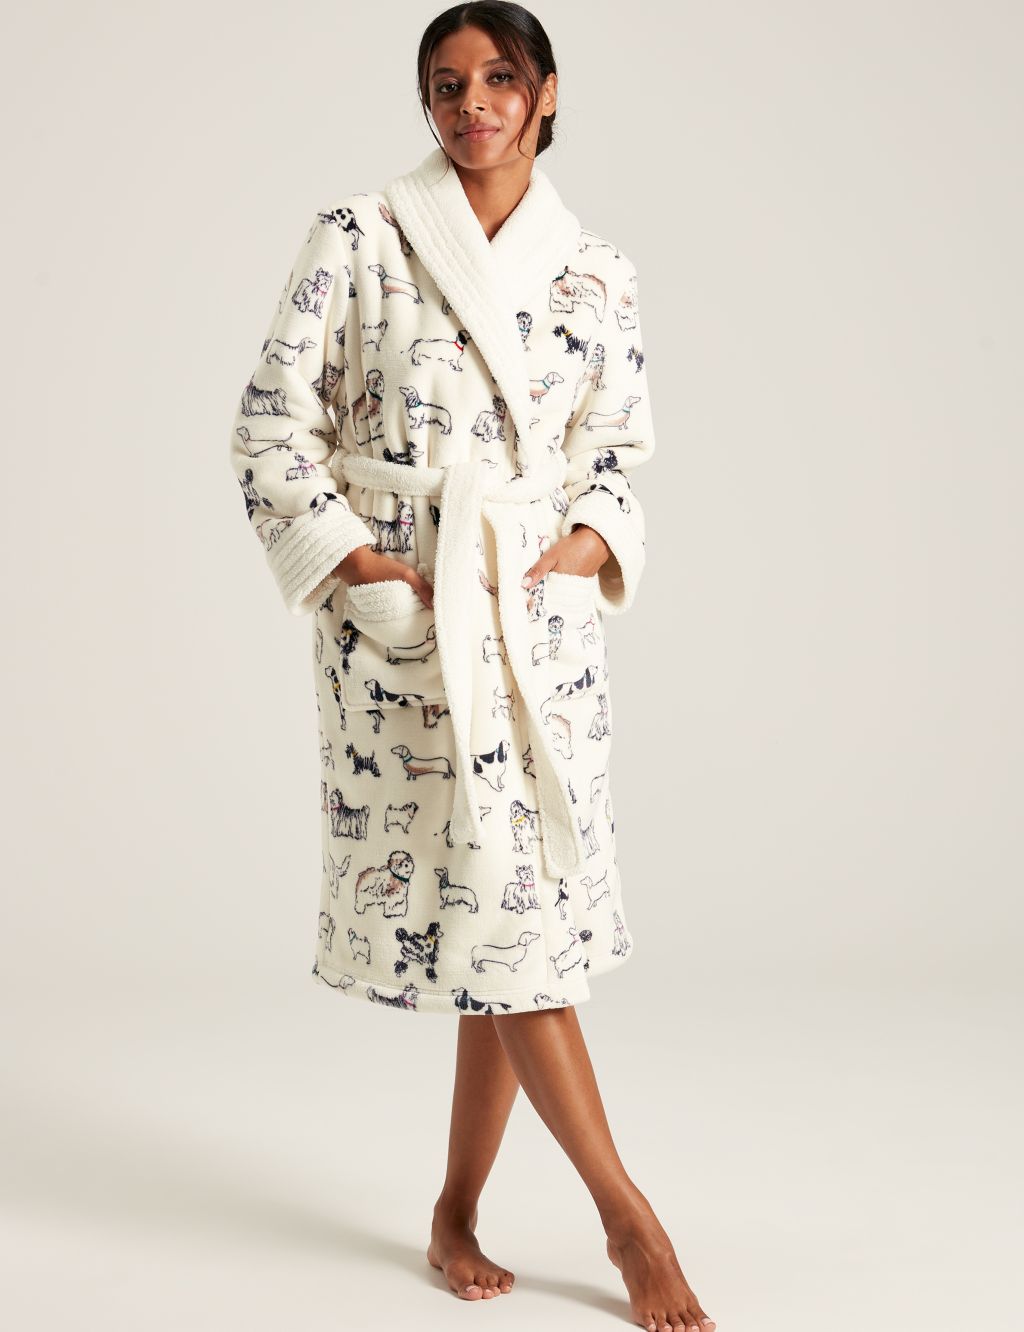 Cotton Modal Dog Print Dressing Gown image 1